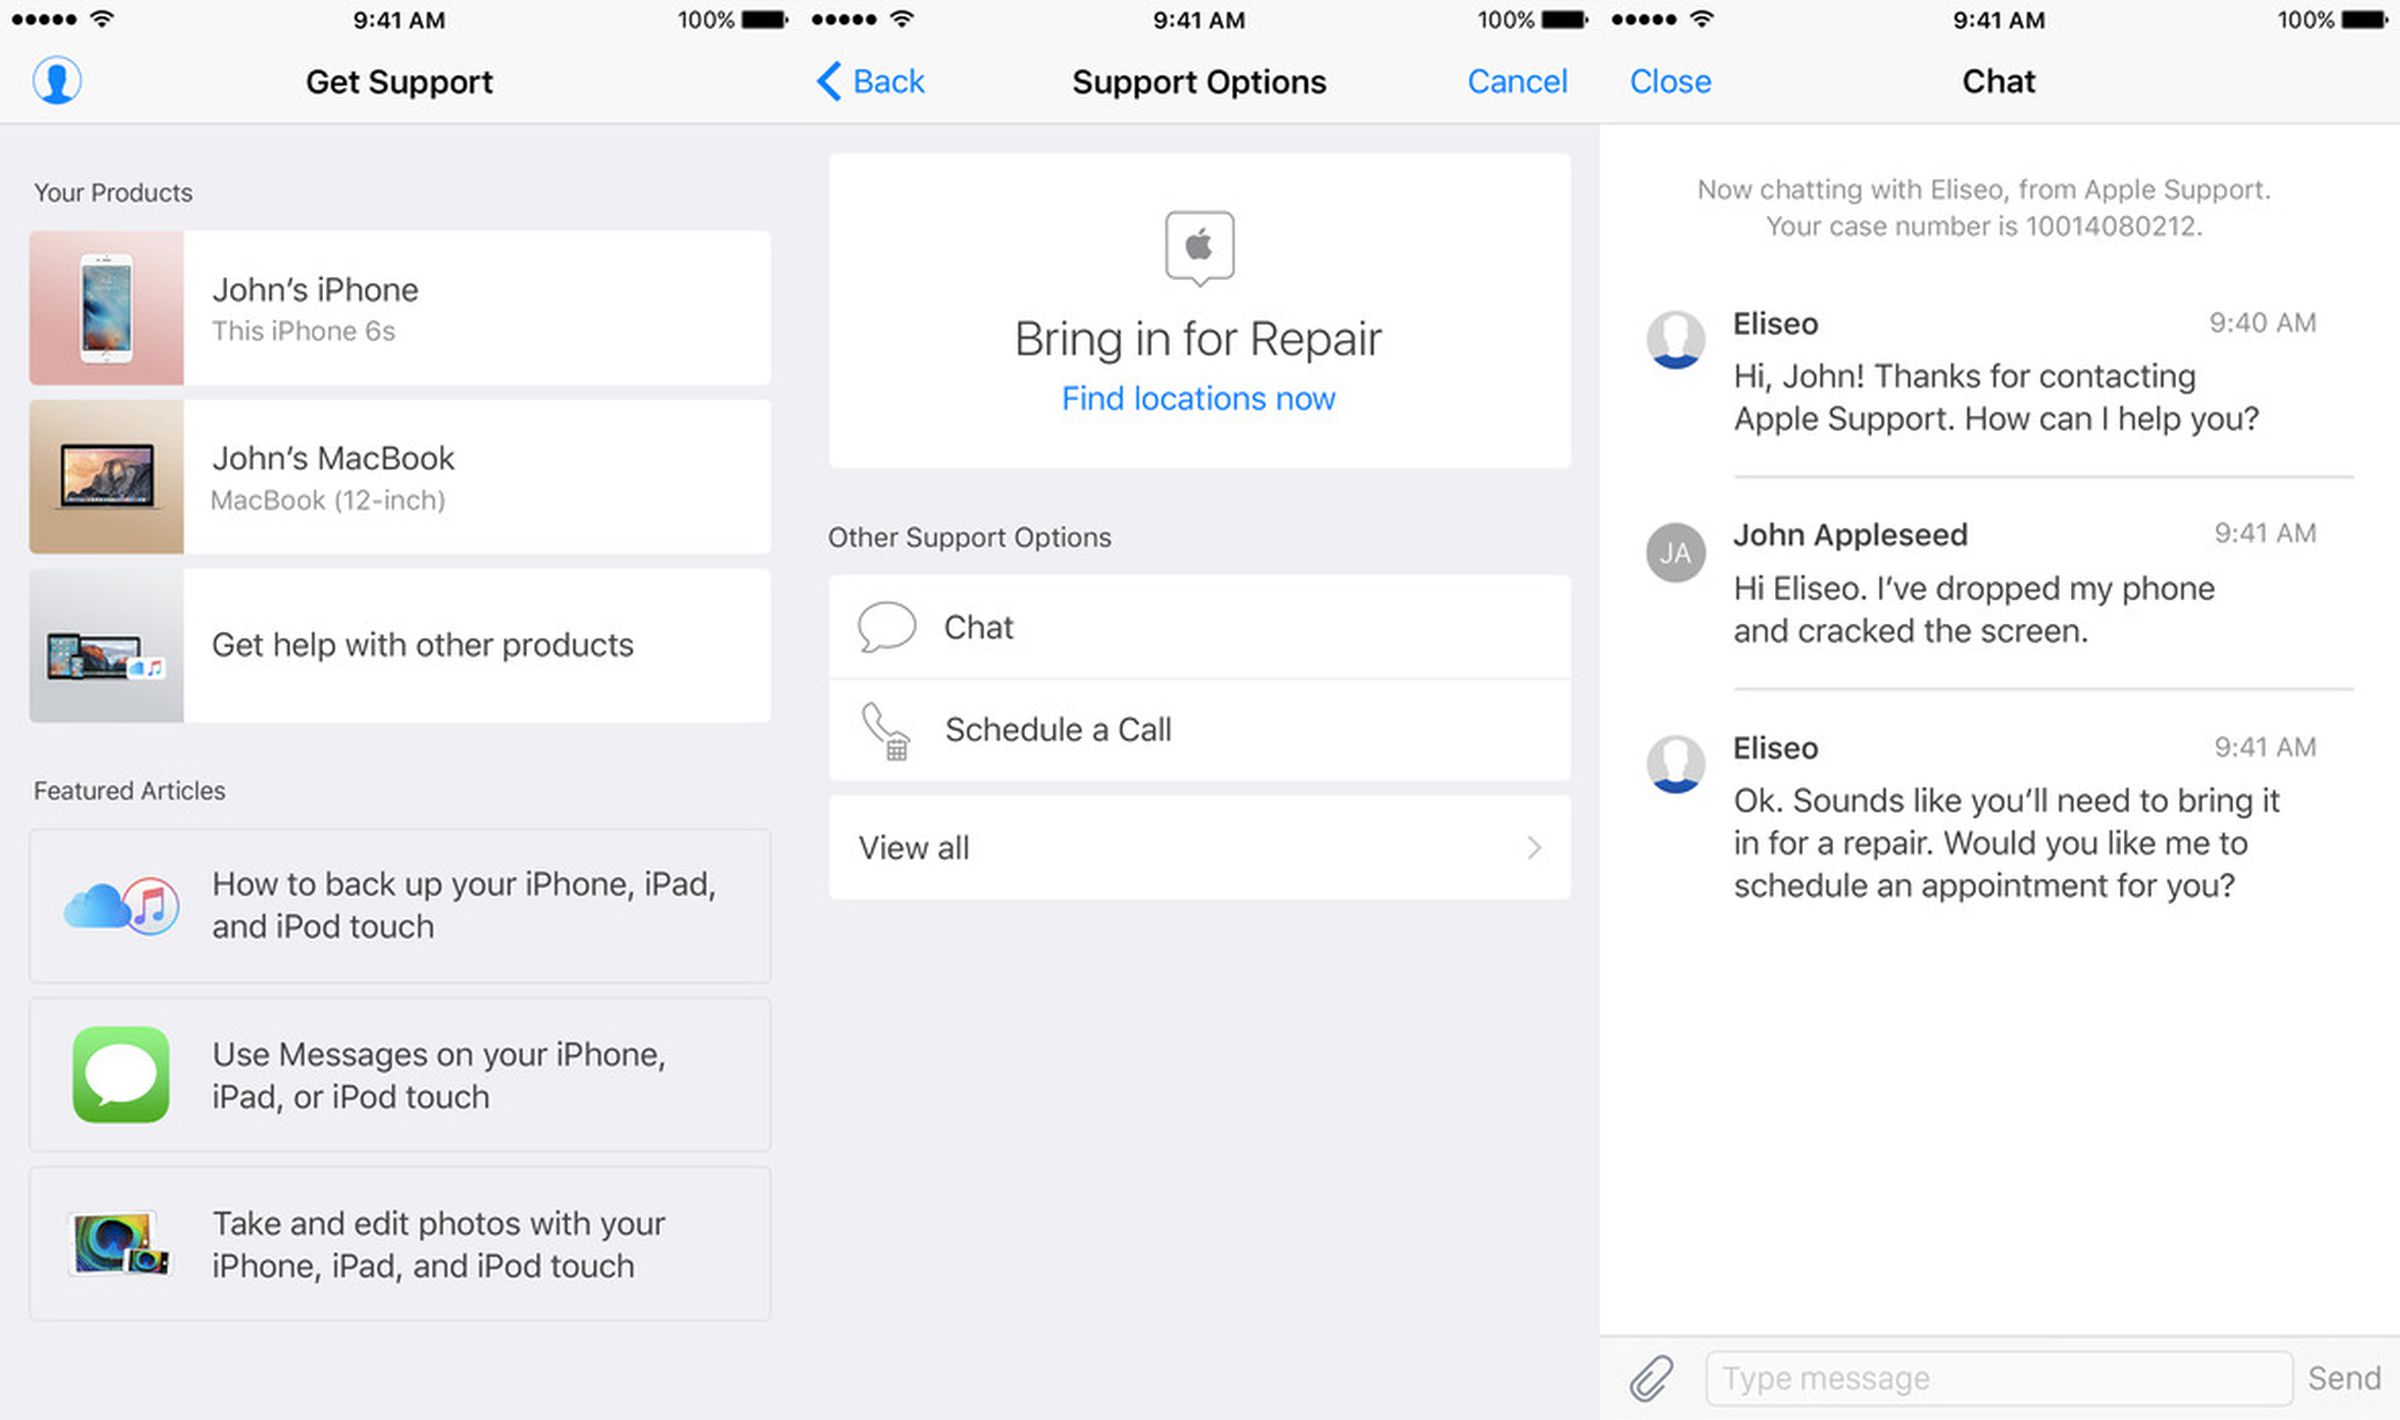 The Apple Support app lets you register your devices and schedule repairs. 